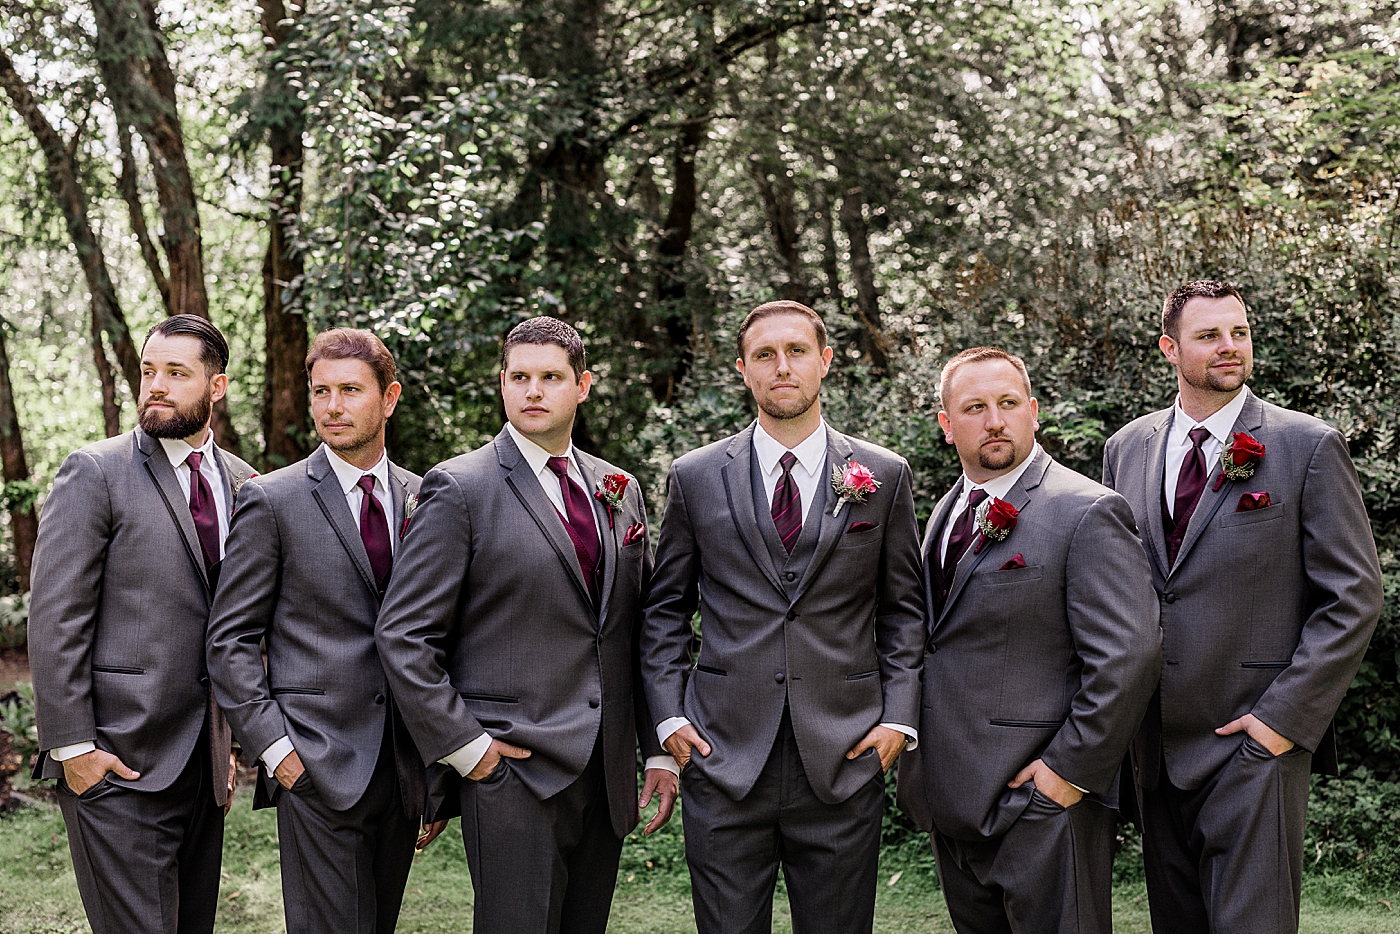 Groom and groomsment wedding photos at Cedar Springs in Port Orchard, WA. Photographed by Tacoma Wedding Photographer, Megan Montalvo Photography. 